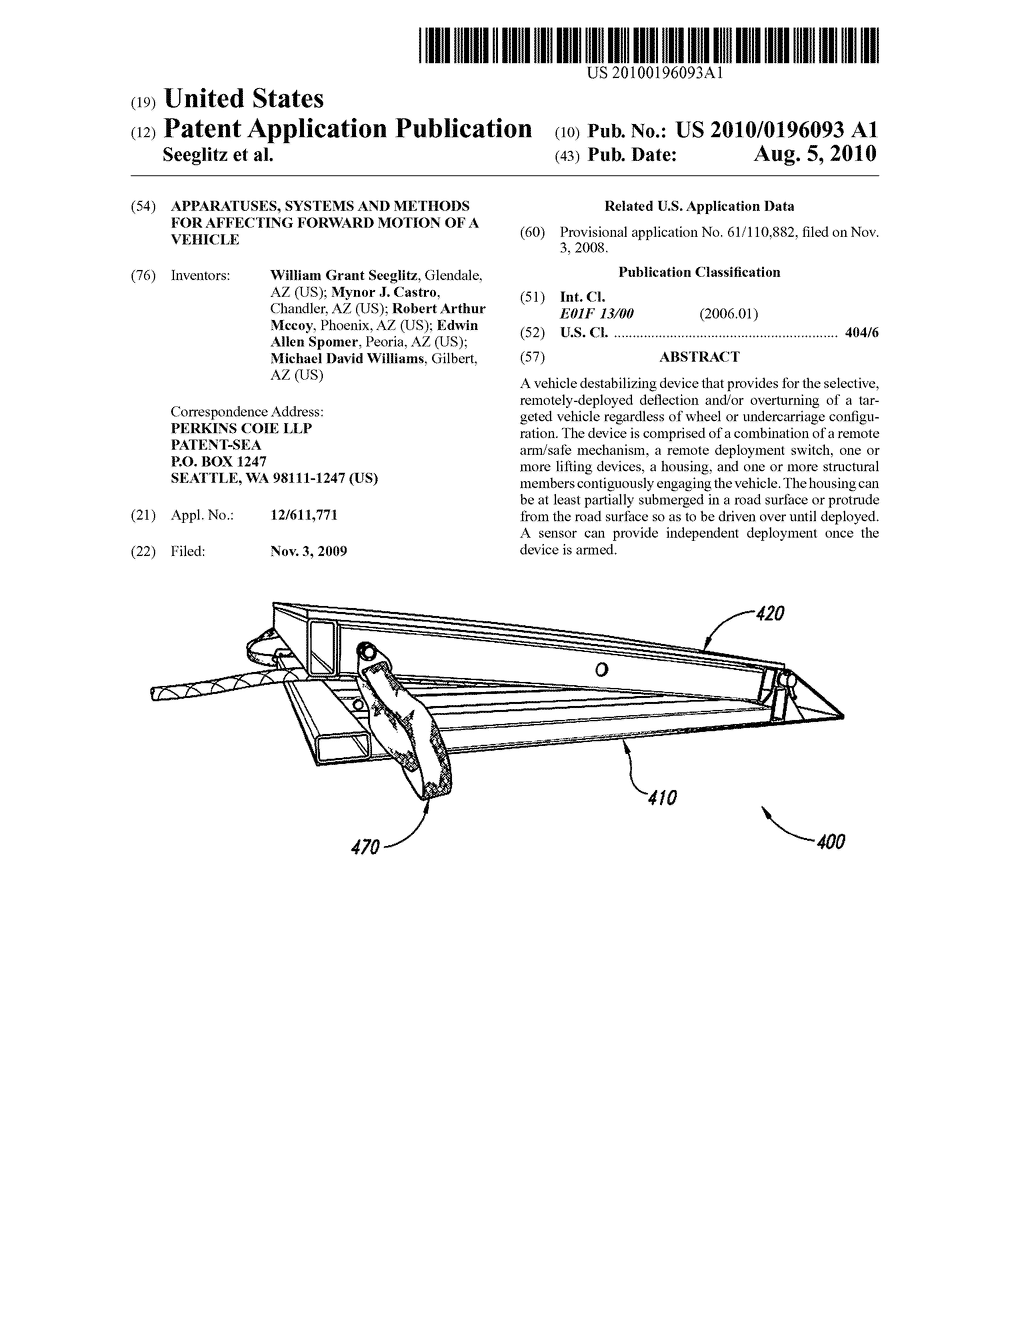 APPARATUSES, SYSTEMS AND METHODS FOR AFFECTING FORWARD MOTION OF A VEHICLE - diagram, schematic, and image 01